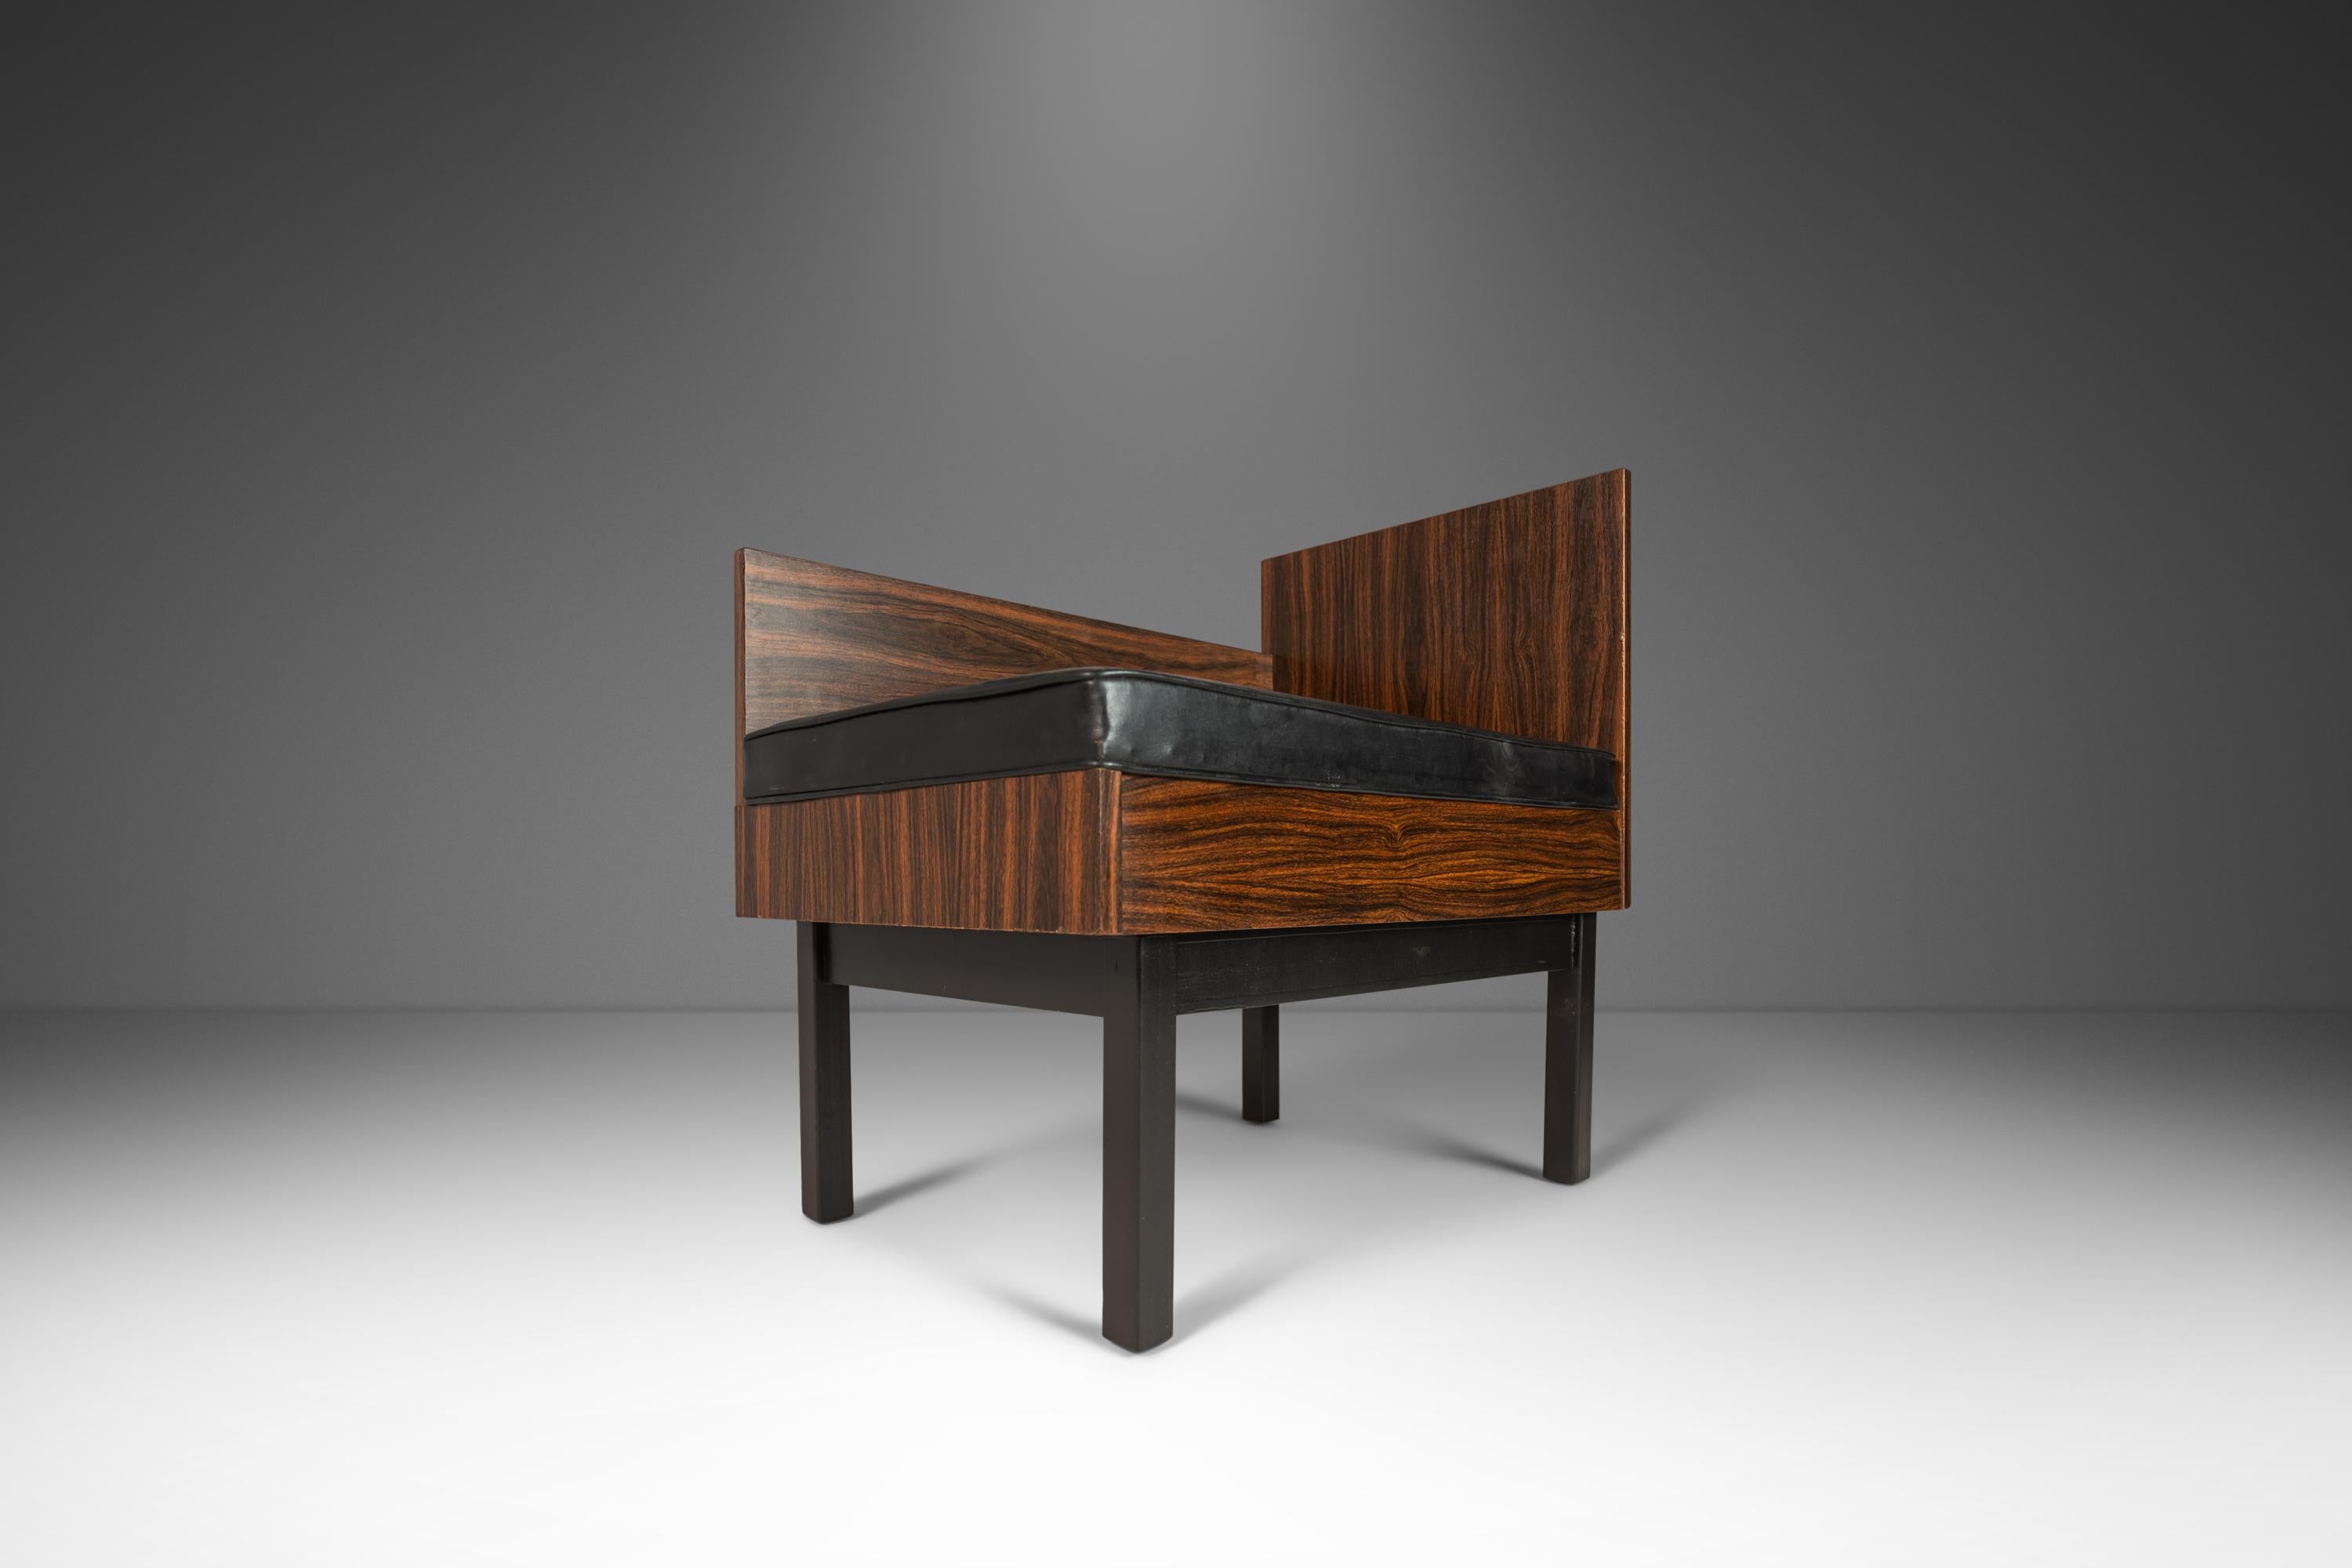 Set of Two ( 2 ) Modular Benches Kissing Benches in Rosewood Laminate, c. 1950's For Sale 3